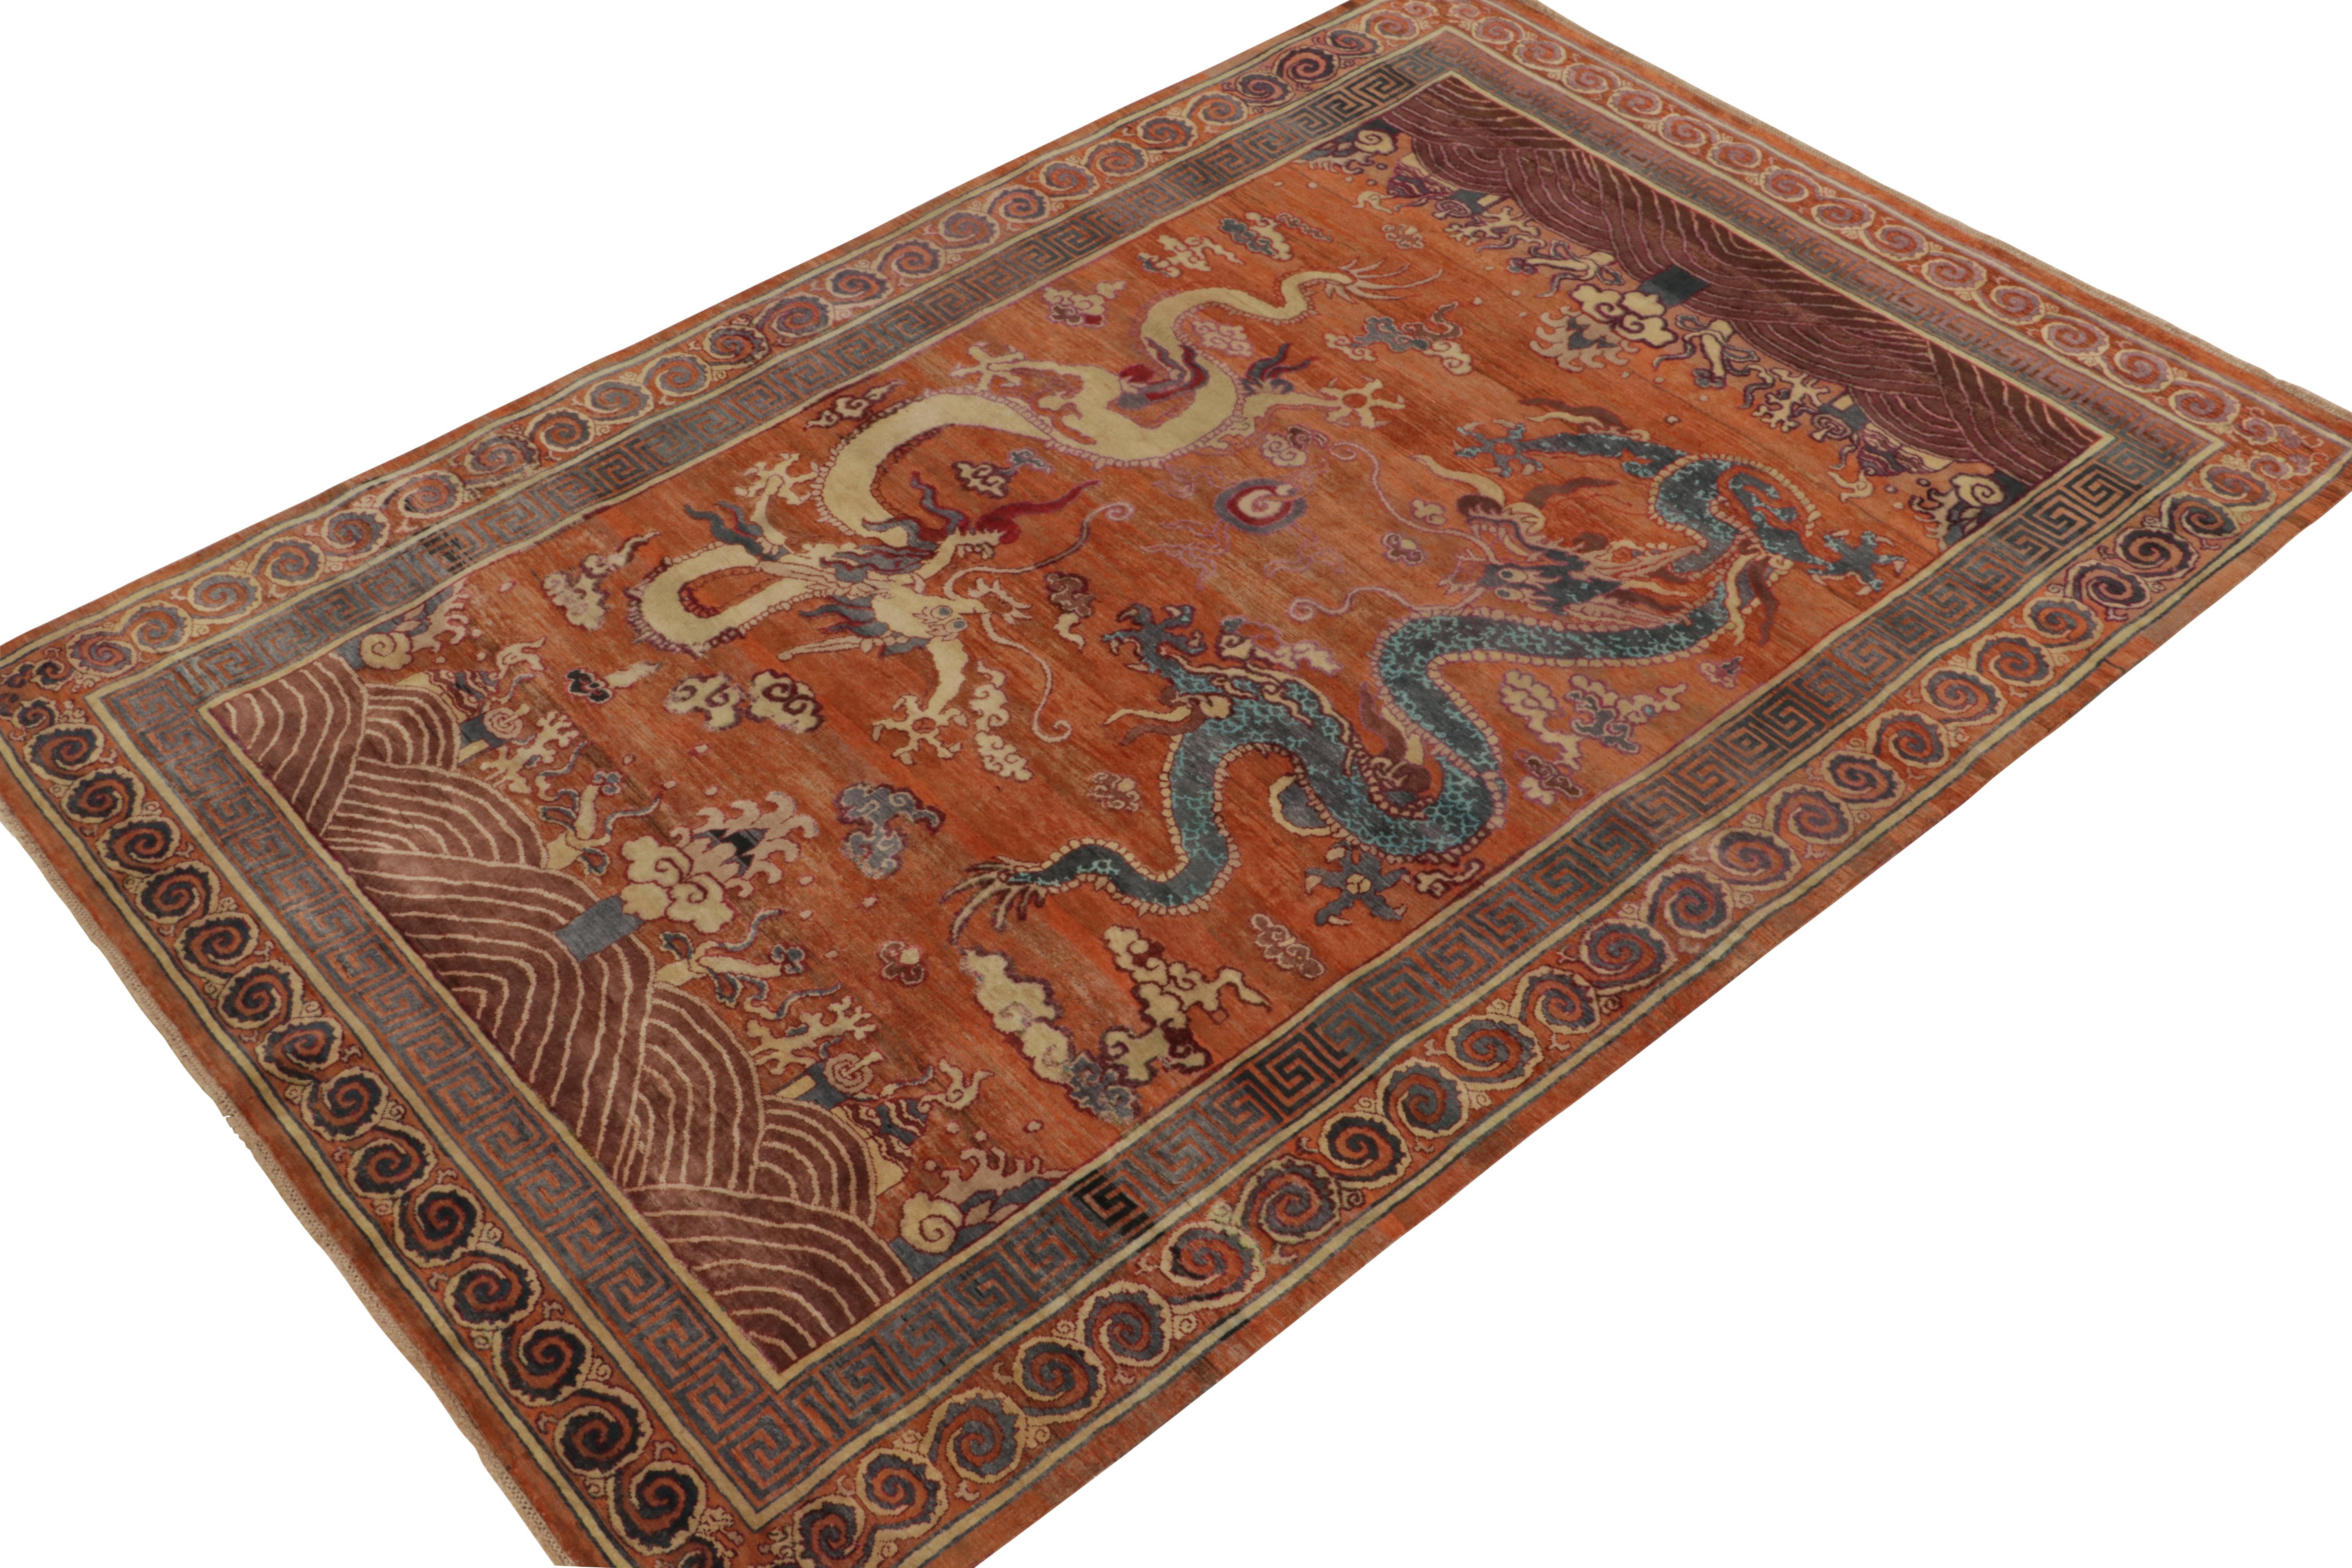 Hand-knotted in wool, this 7x10 from our Modern Classics collection recaptures an iconic, rare style of Chinese pictorial rugs.

On the Design: The portrait depicts soaring Chinese dragons — renowned as symbols of divinity, fortune, and similar